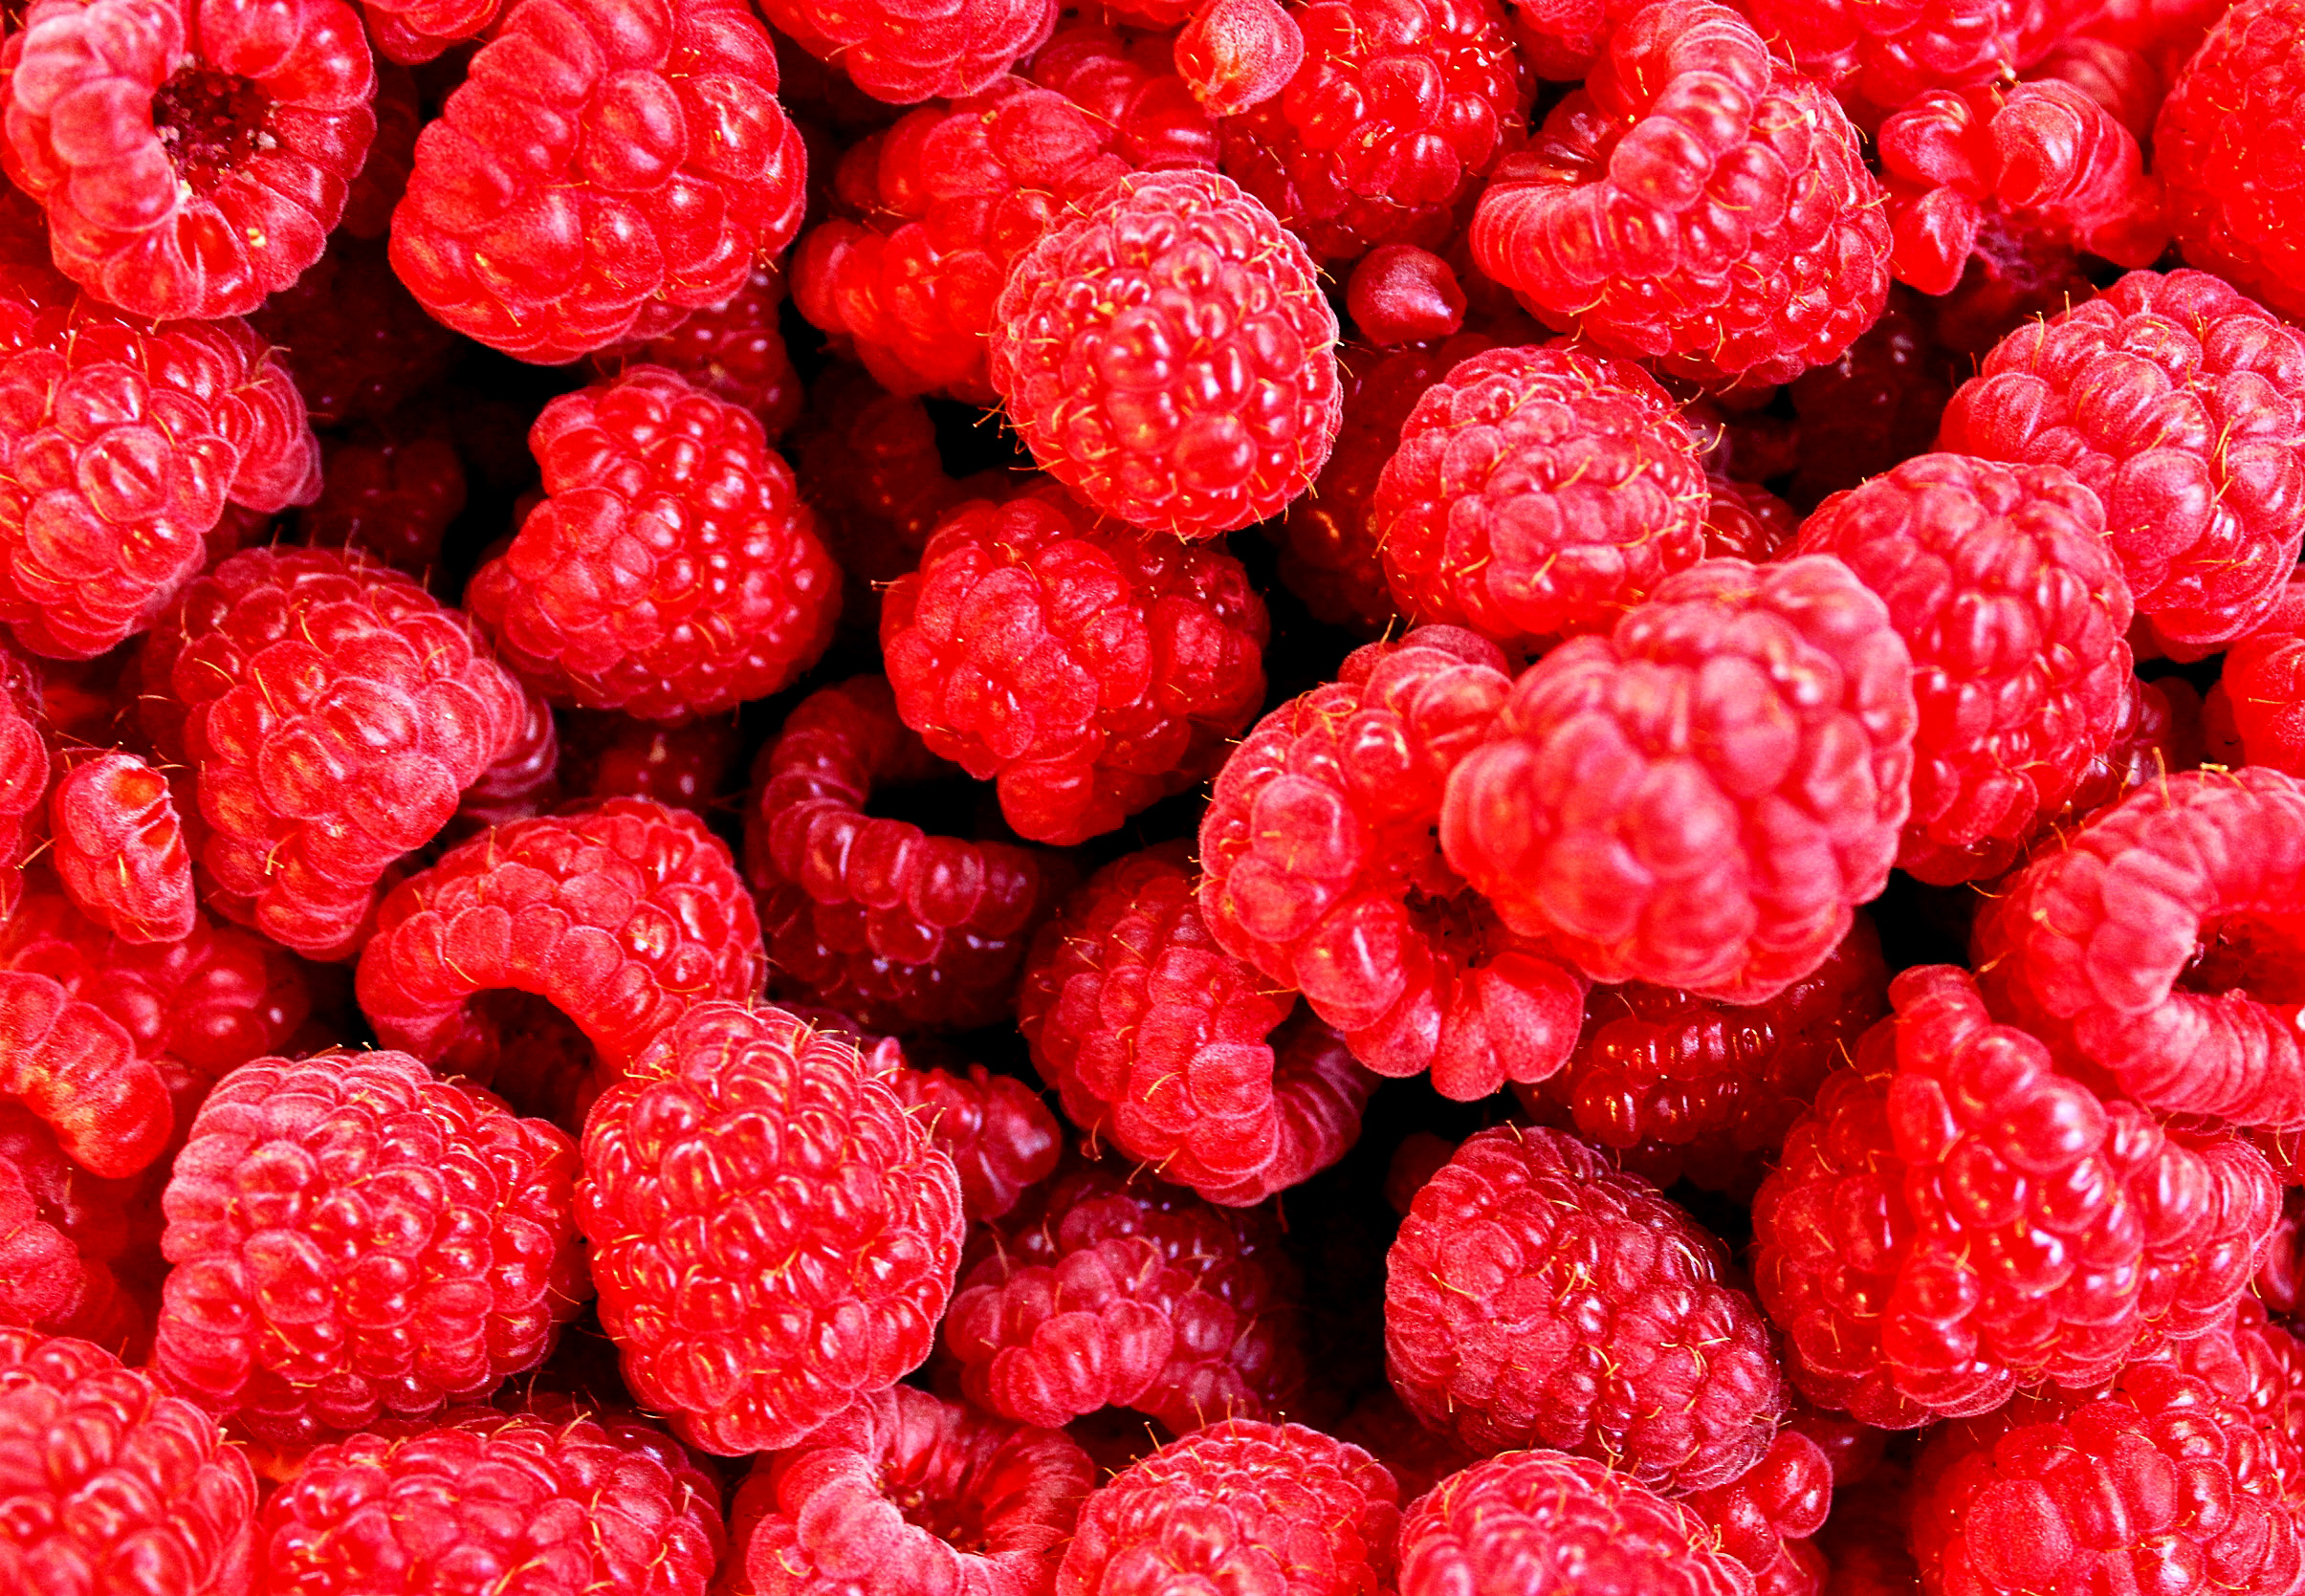 Raspberries only, Antioxidants, Natural, Top, Table, HQ Photo